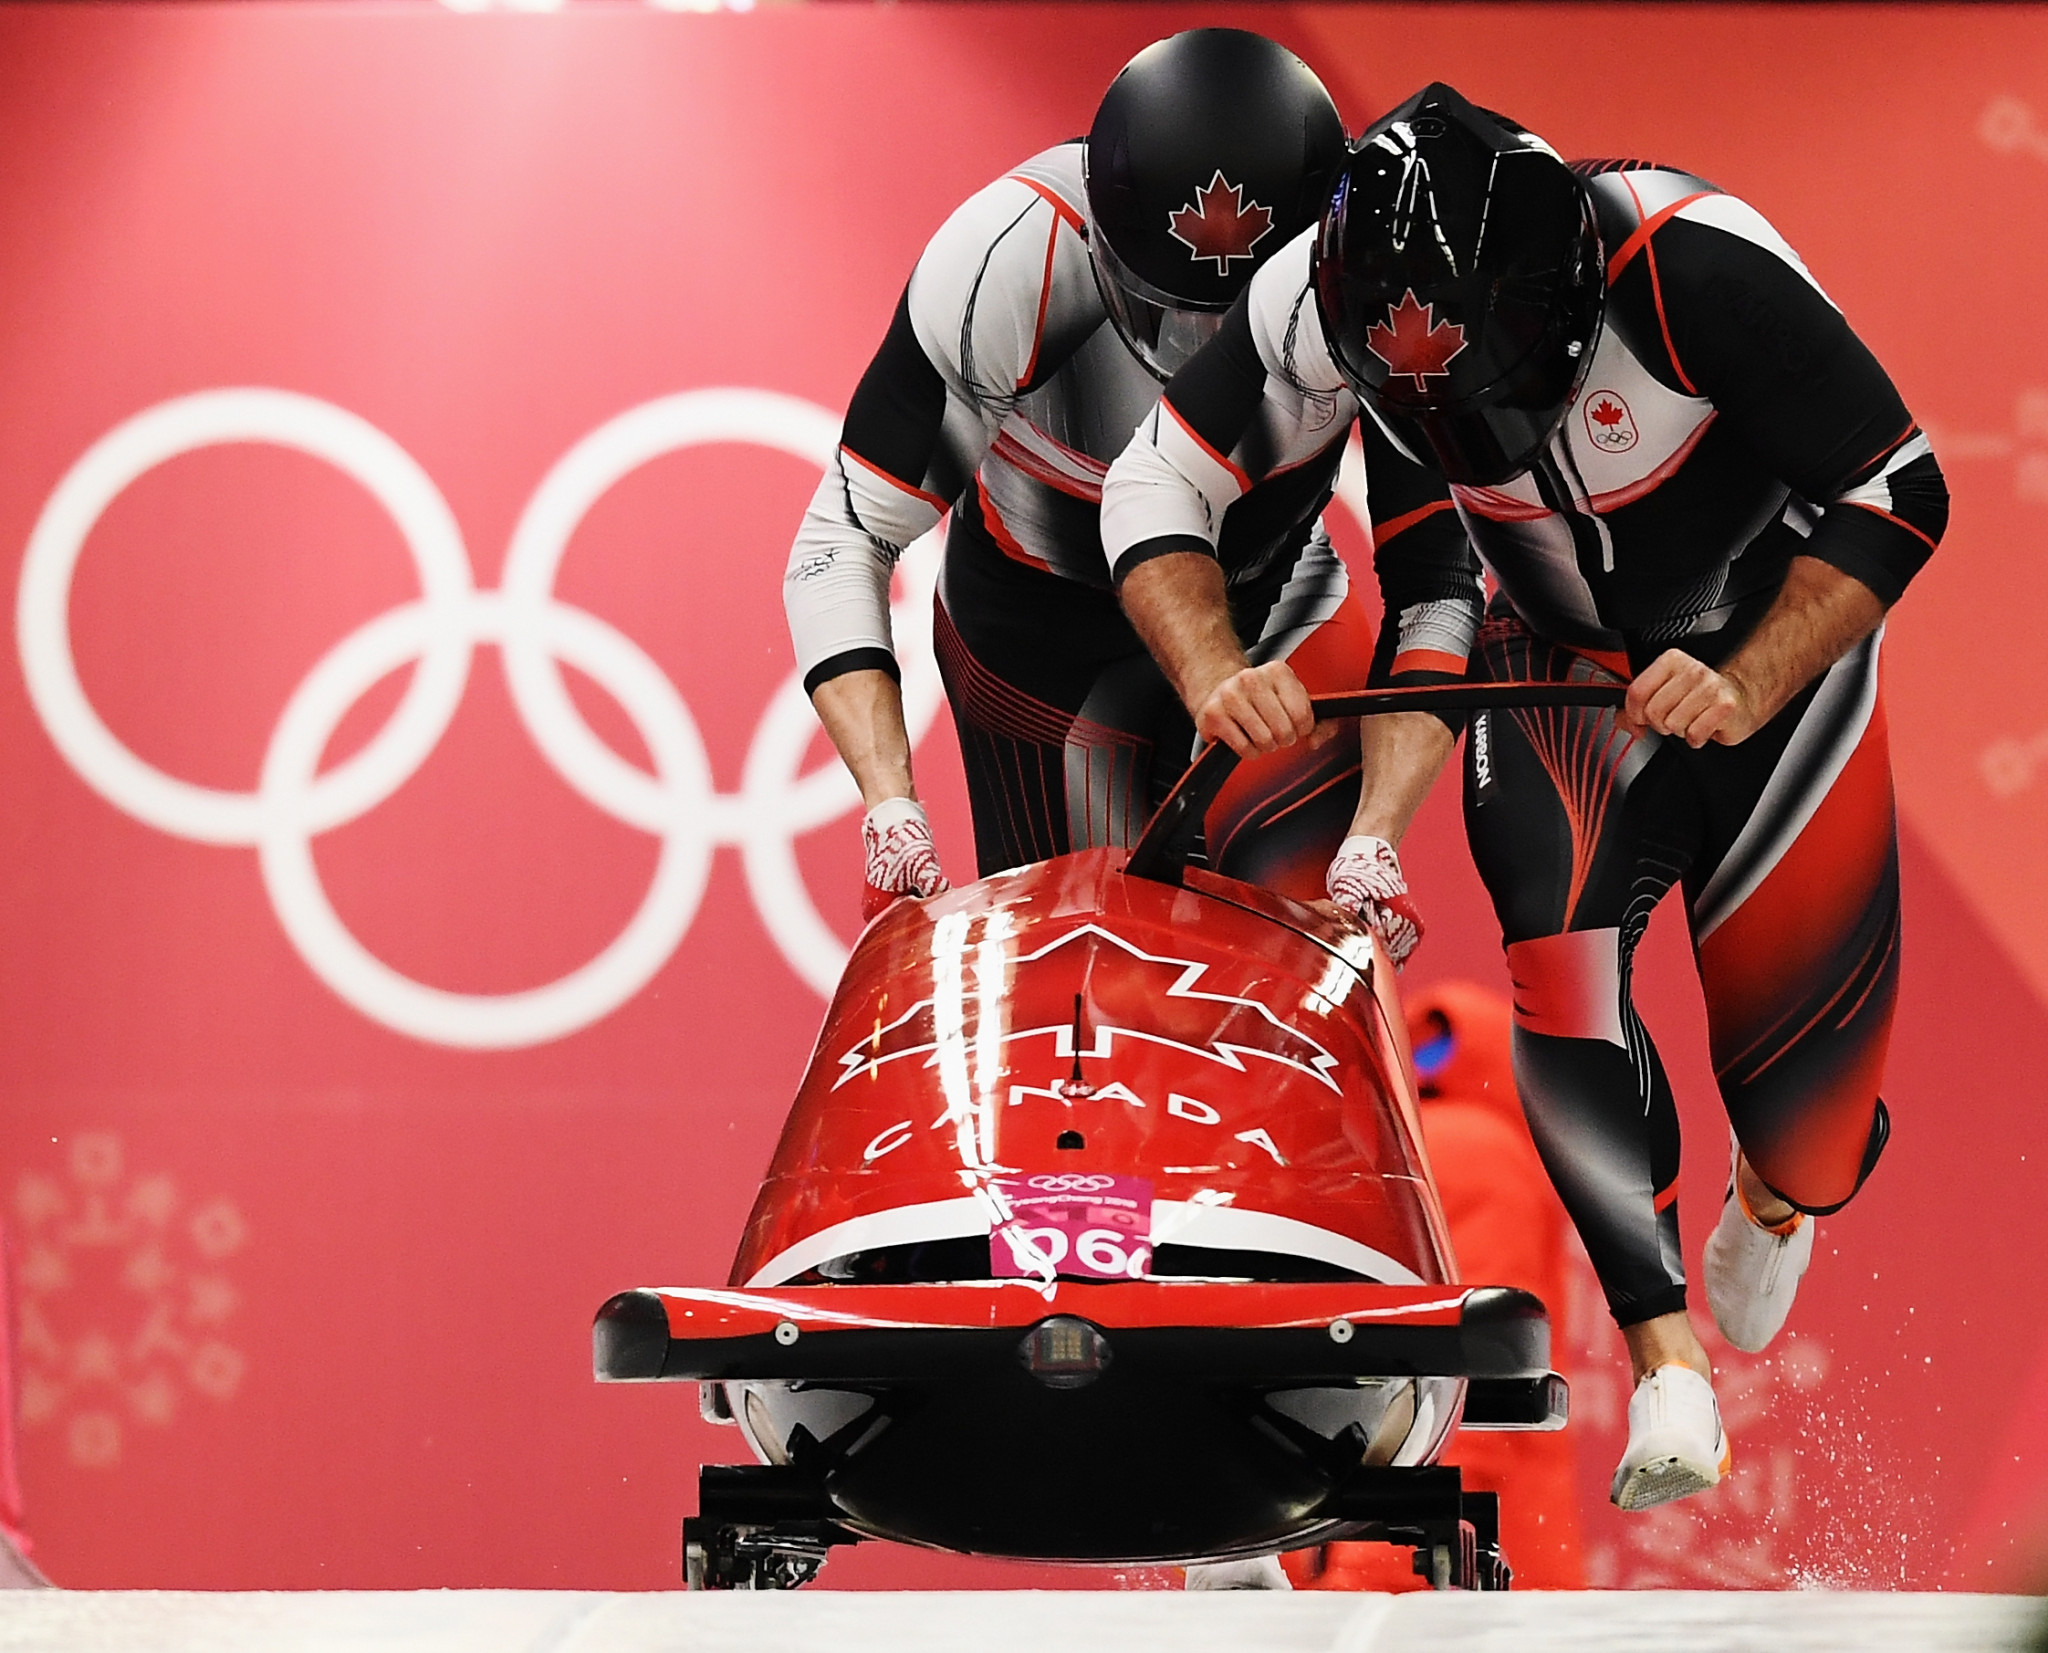 The Canadian duo recorded the same time as their German rivals to share the gold medal ©Getty Images